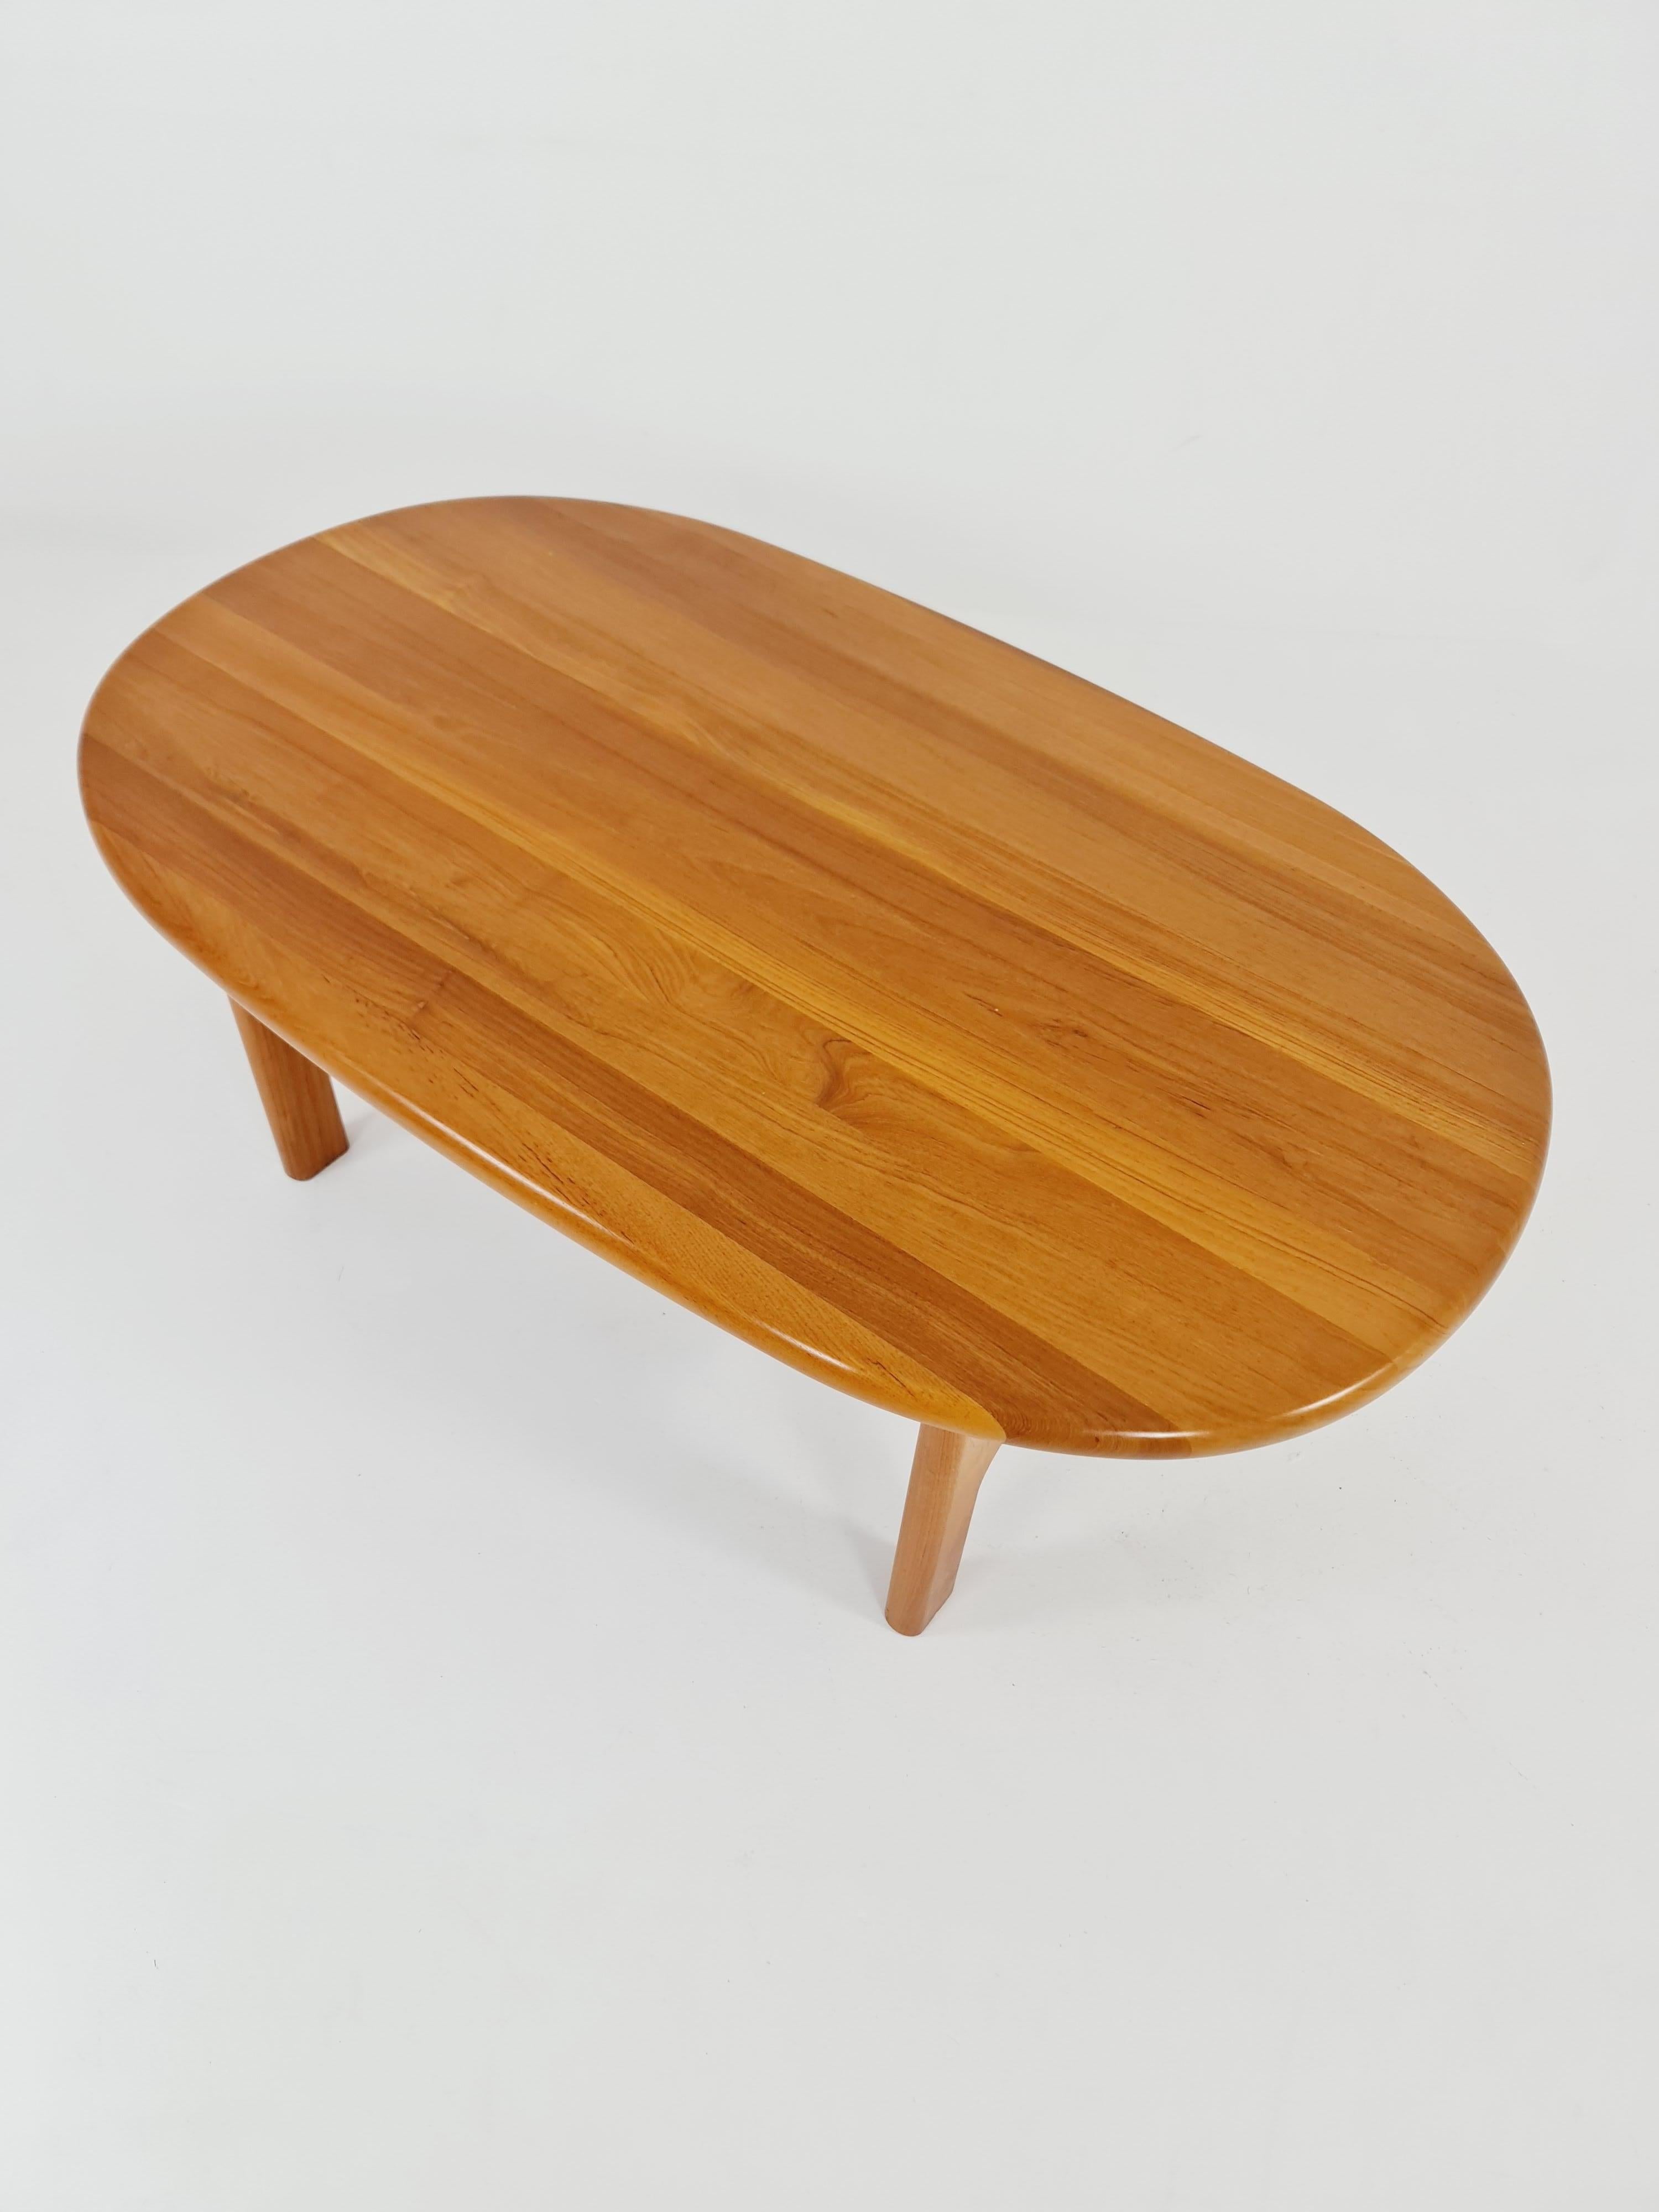 Danish Teak solid coffee table/ side table By Niels Bach for Randers Möbel,1960s

Design year: 1960s

Made in Denmark


Dimensions: : 82 D x 135 W x 50 H cm

It is in great vintage condtion, however, as with all vintage items some minor wear marks